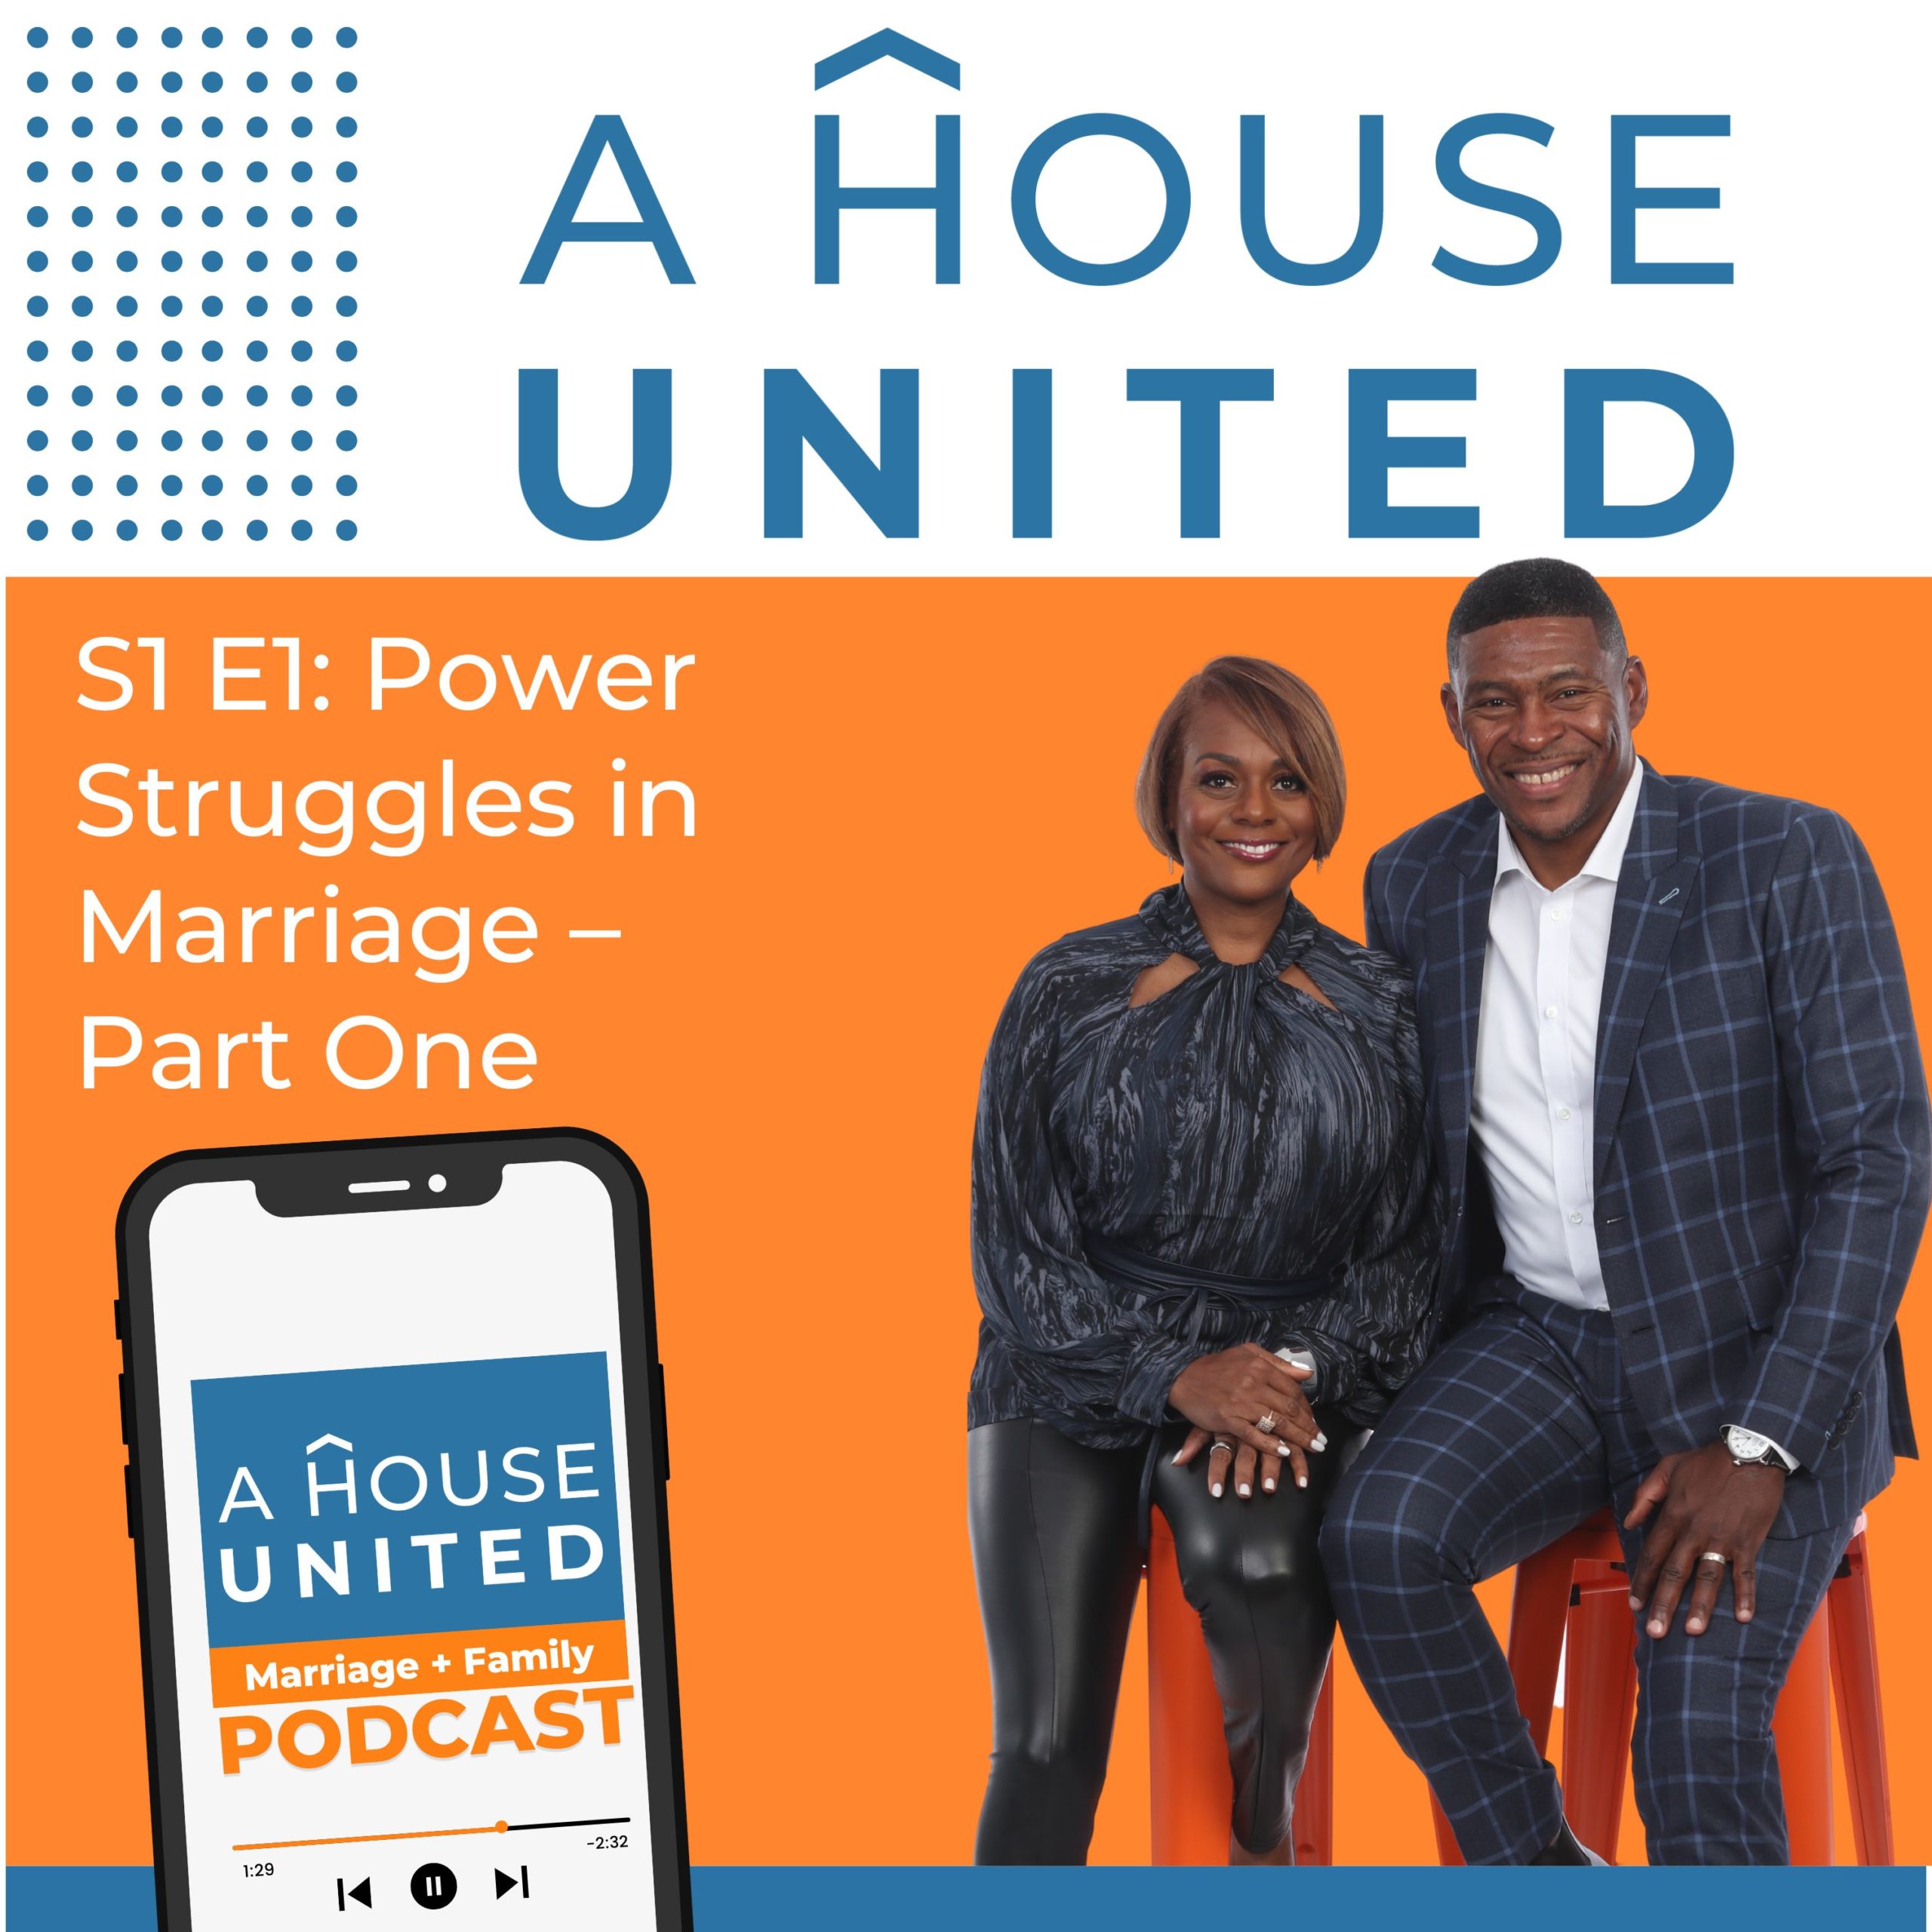 A House United S1 E1: Power Struggles in Marriage – Part One